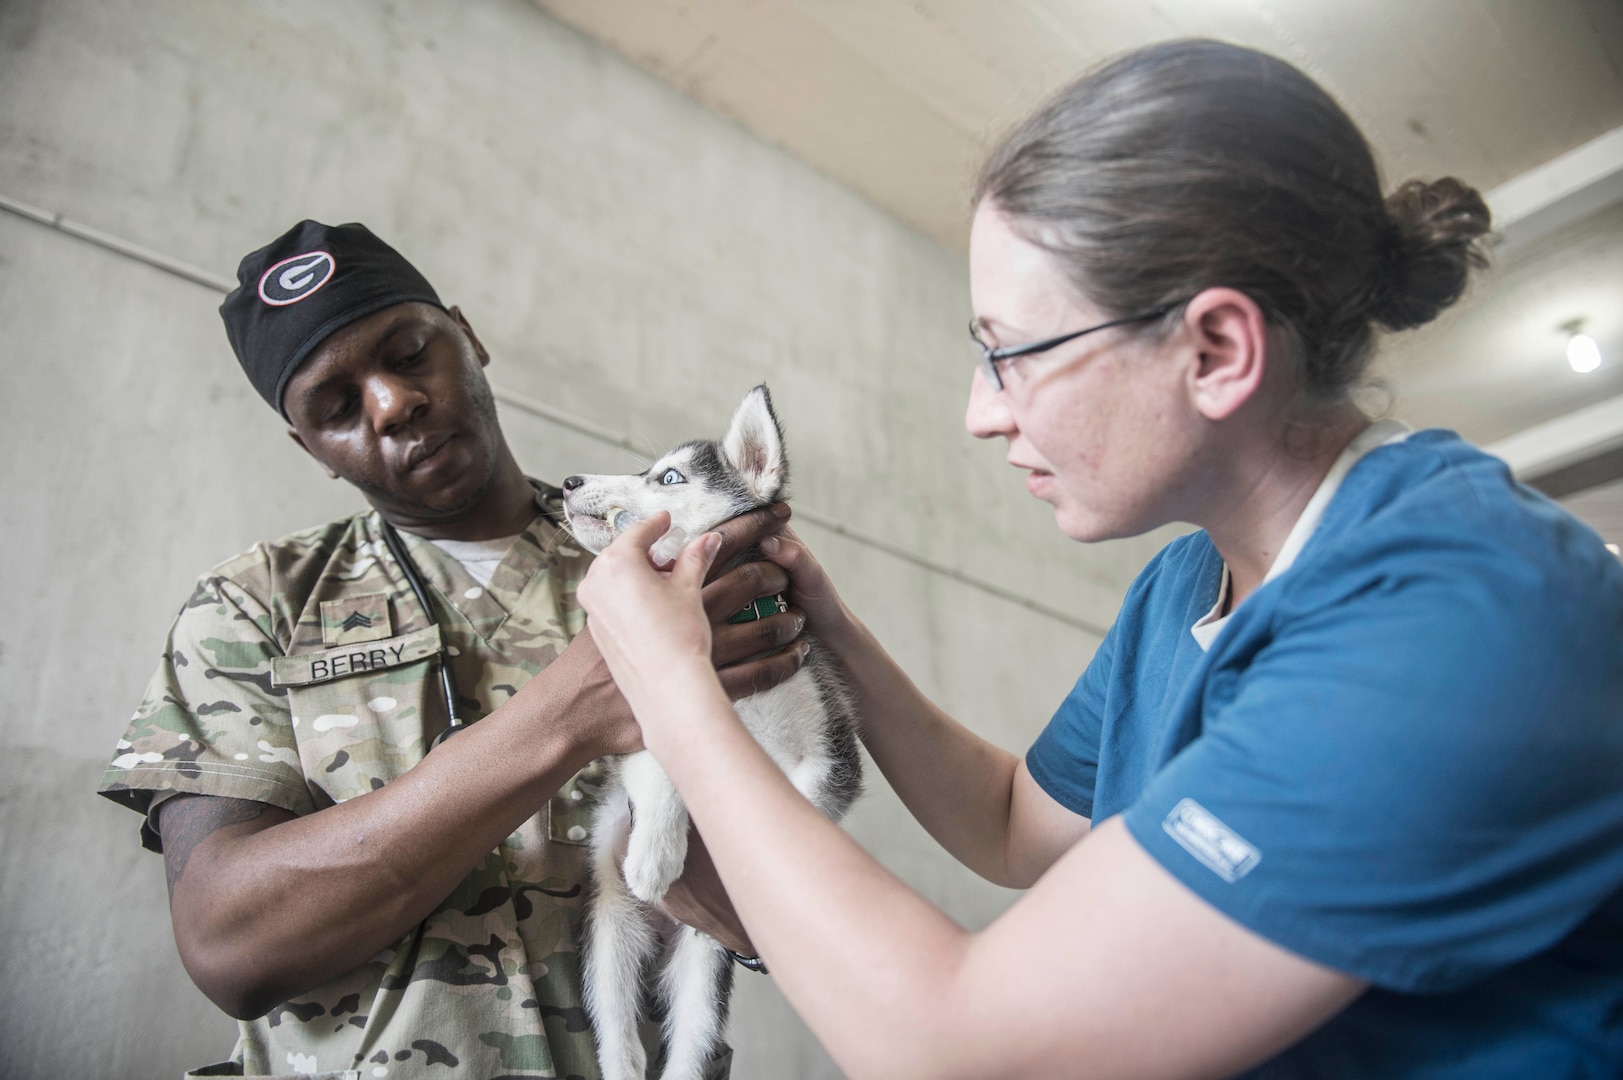 PUERTO BARRIOS, Guatemala (Feb. 3, 2017) -- Army Capt. Erin Stein (right), of Macomb, Ill., assigned to Public Health Activity-Fort Gordon Redstone Section Veterinary Service, Ga., and Army Sgt. Patric Berry of Columbus, Ga., assigned to Public Health Activities-Fort Gordon, Ga., administers pyrantel, a broad spectrum dewormer, to pets belonging to host nationals at the Continuing Promise (CP-17) veterinarian site in Puerto Barrios, Guatemala. CP-17 is a U.S. Southern Command-sponsored and U.S. Naval Forces Southern Command/U.S. 4th Fleet-conducted deployment to conduct civil-military operations including humanitarian assistance, training engagements, medical, dental, and veterinary support in an effort to show U.S. support and commitment to Central and South America. (U.S. Navy Combat Camera photo by Mass Communication Specialist 2nd Class Ridge Leoni)